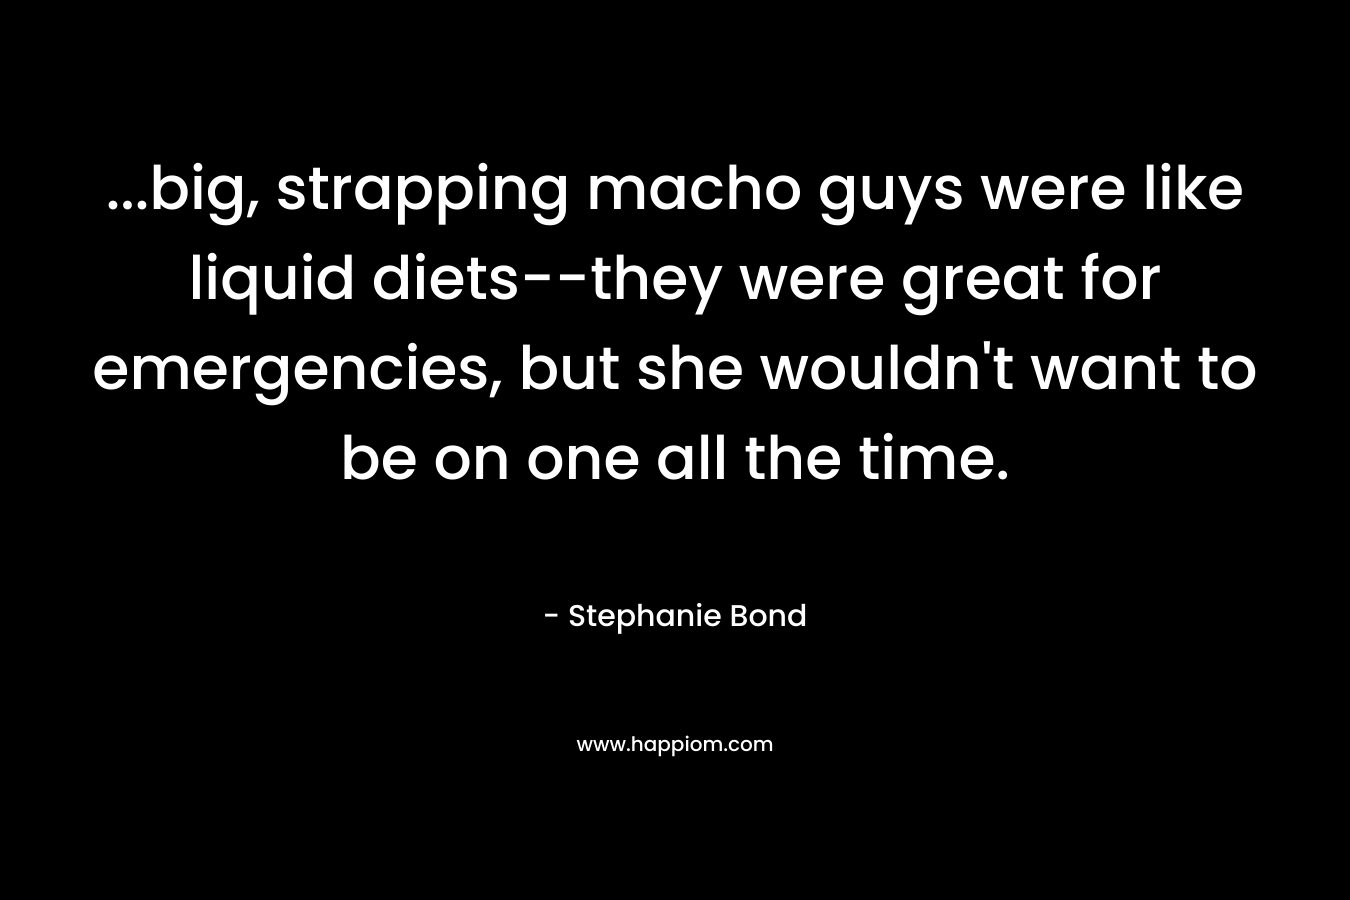 …big, strapping macho guys were like liquid diets–they were great for emergencies, but she wouldn’t want to be on one all the time. – Stephanie Bond